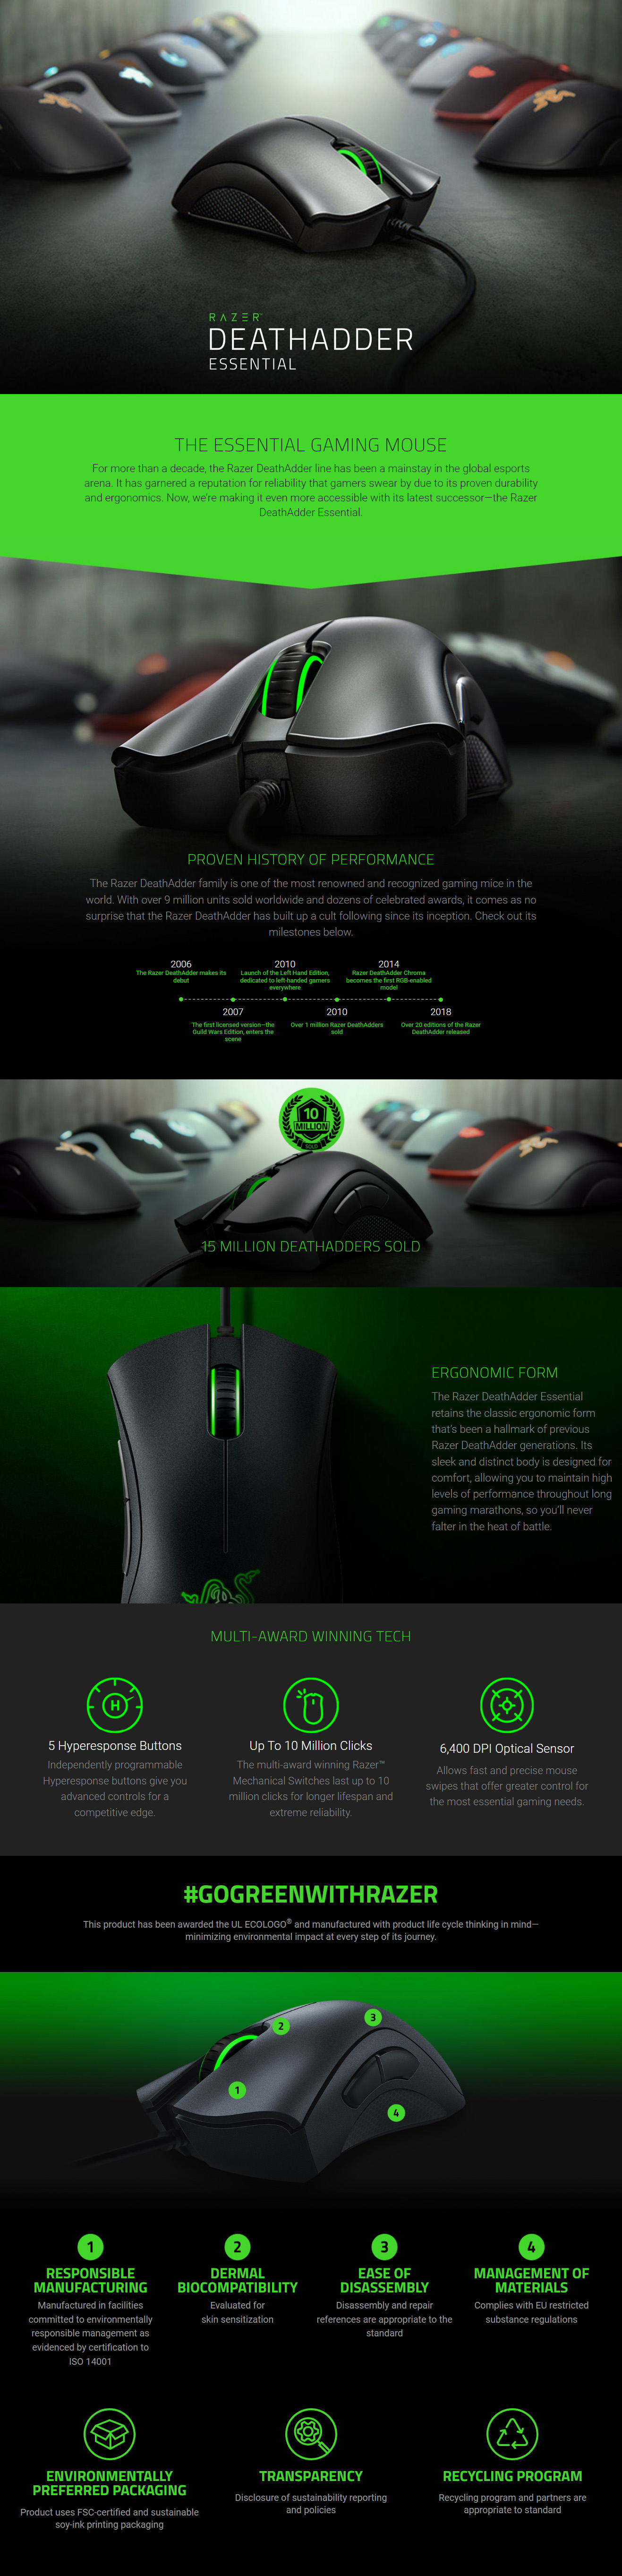 Razer-DeathAdder-Essential-Ergonomic-Wired-Gaming-Mouse-White-Edition-3